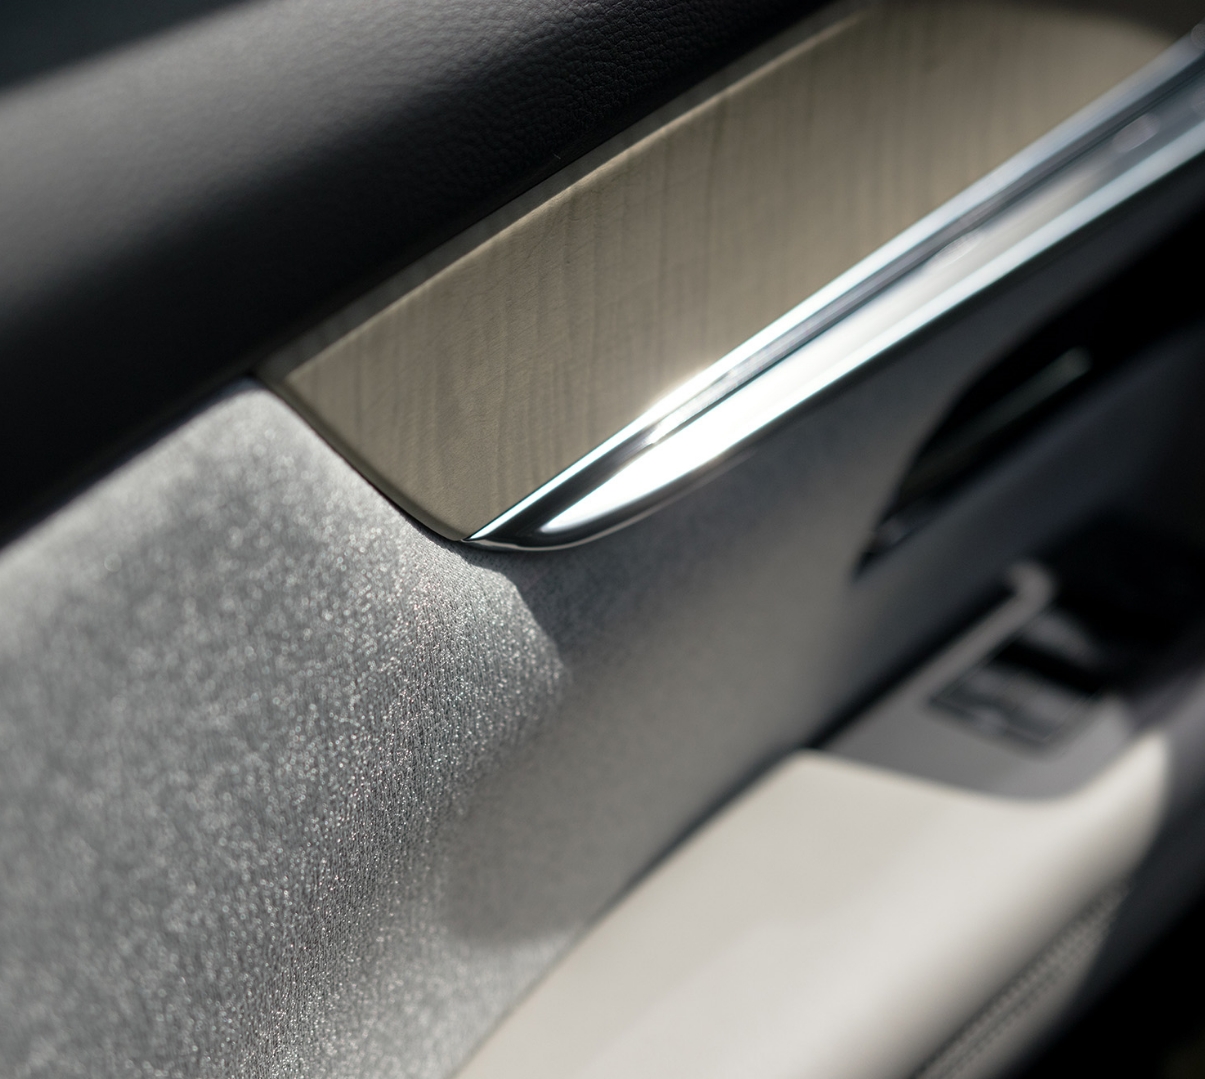 The front door armrest finished in real maple wood trim in the Mazda CX-60